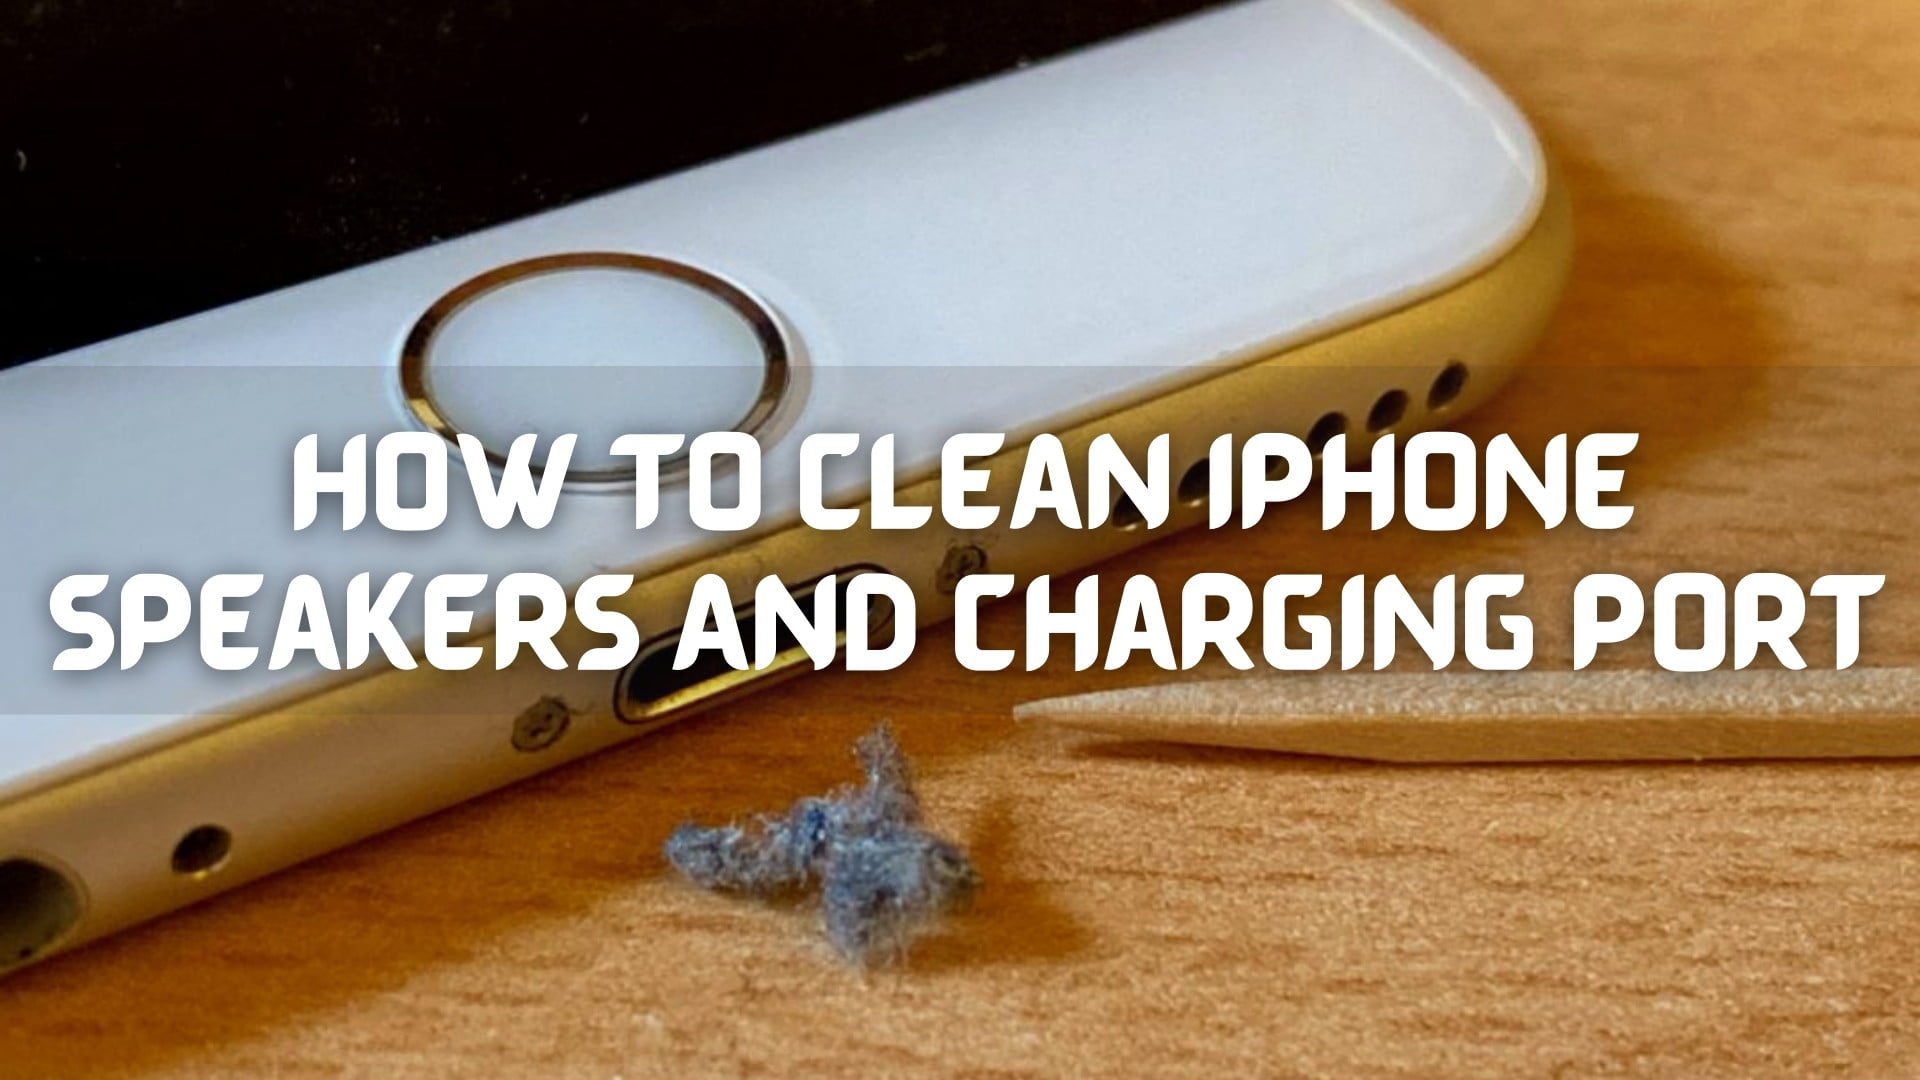 How To Clean iPhone Speakers And Charging Port